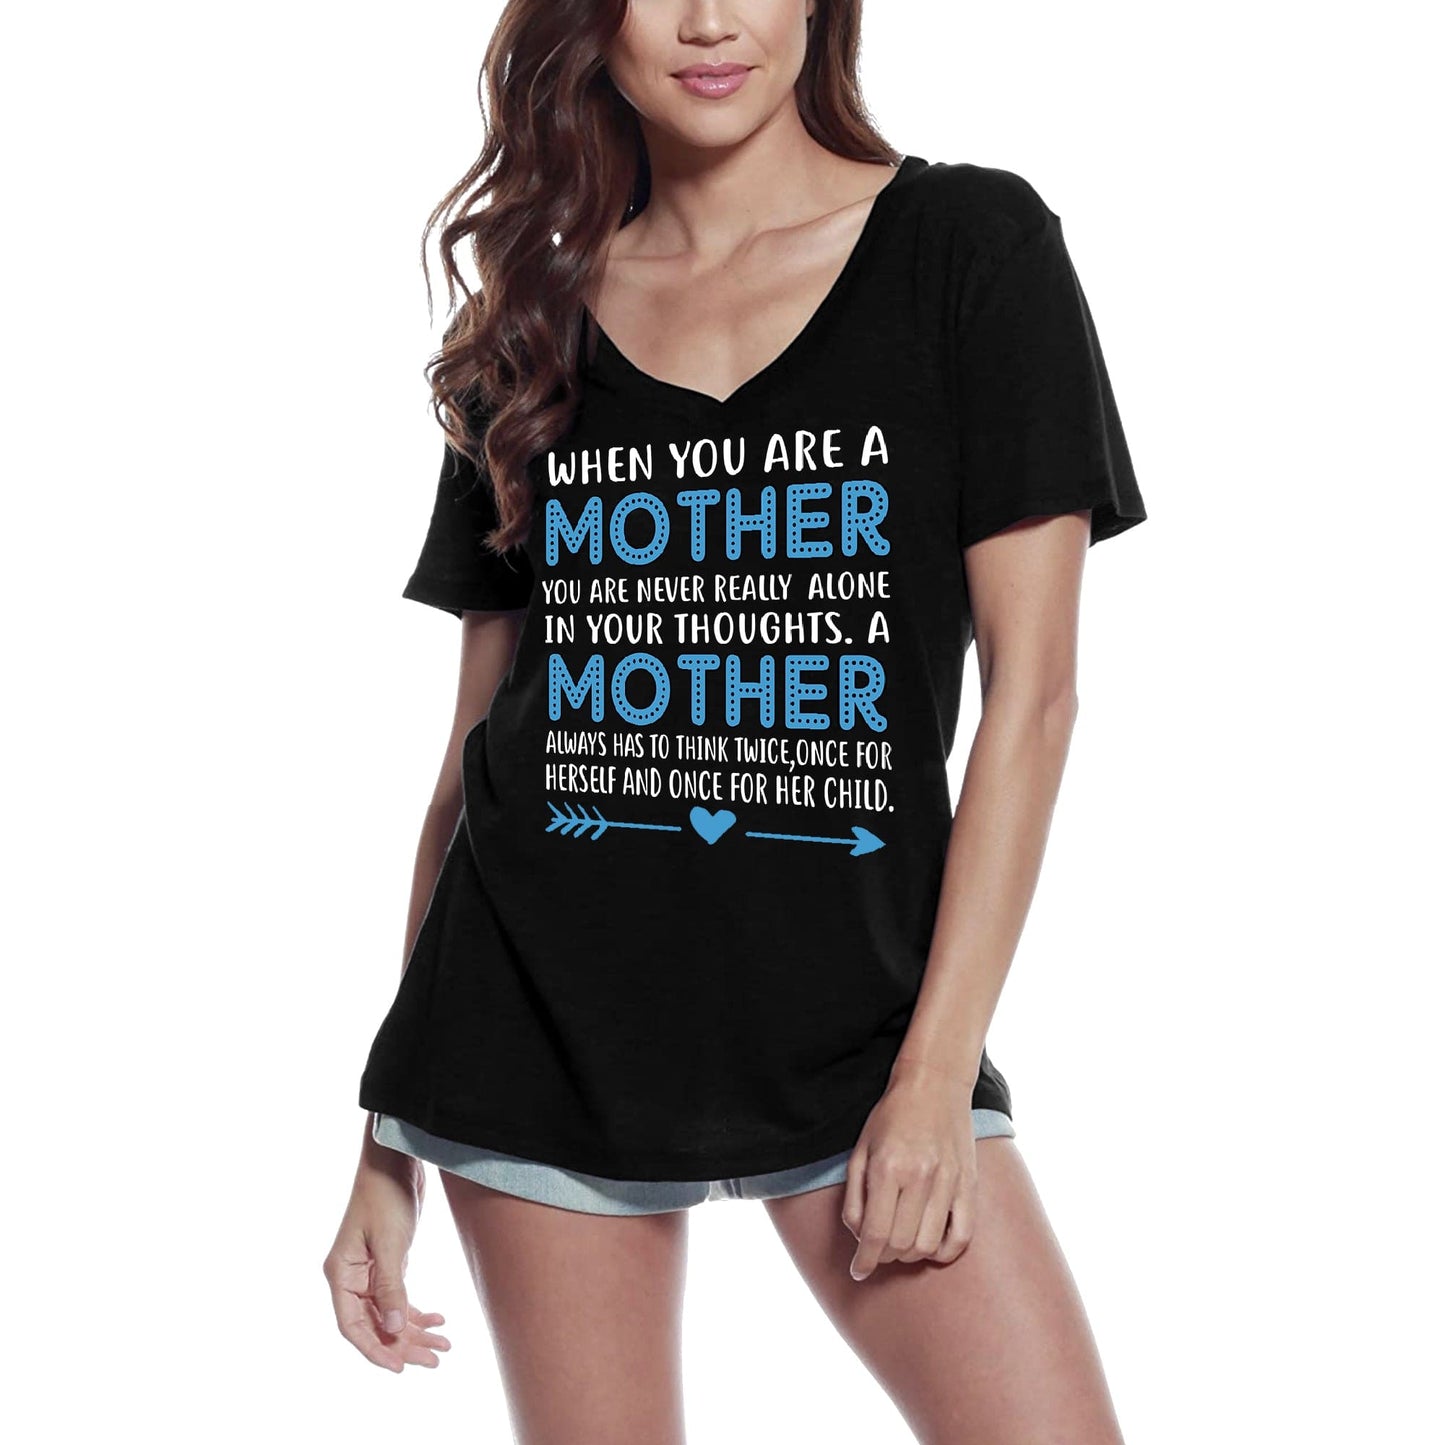 ULTRABASIC Damen-T-Shirt „When You Are a Mother You Are Never Alone“ – T-Shirt für Mütter